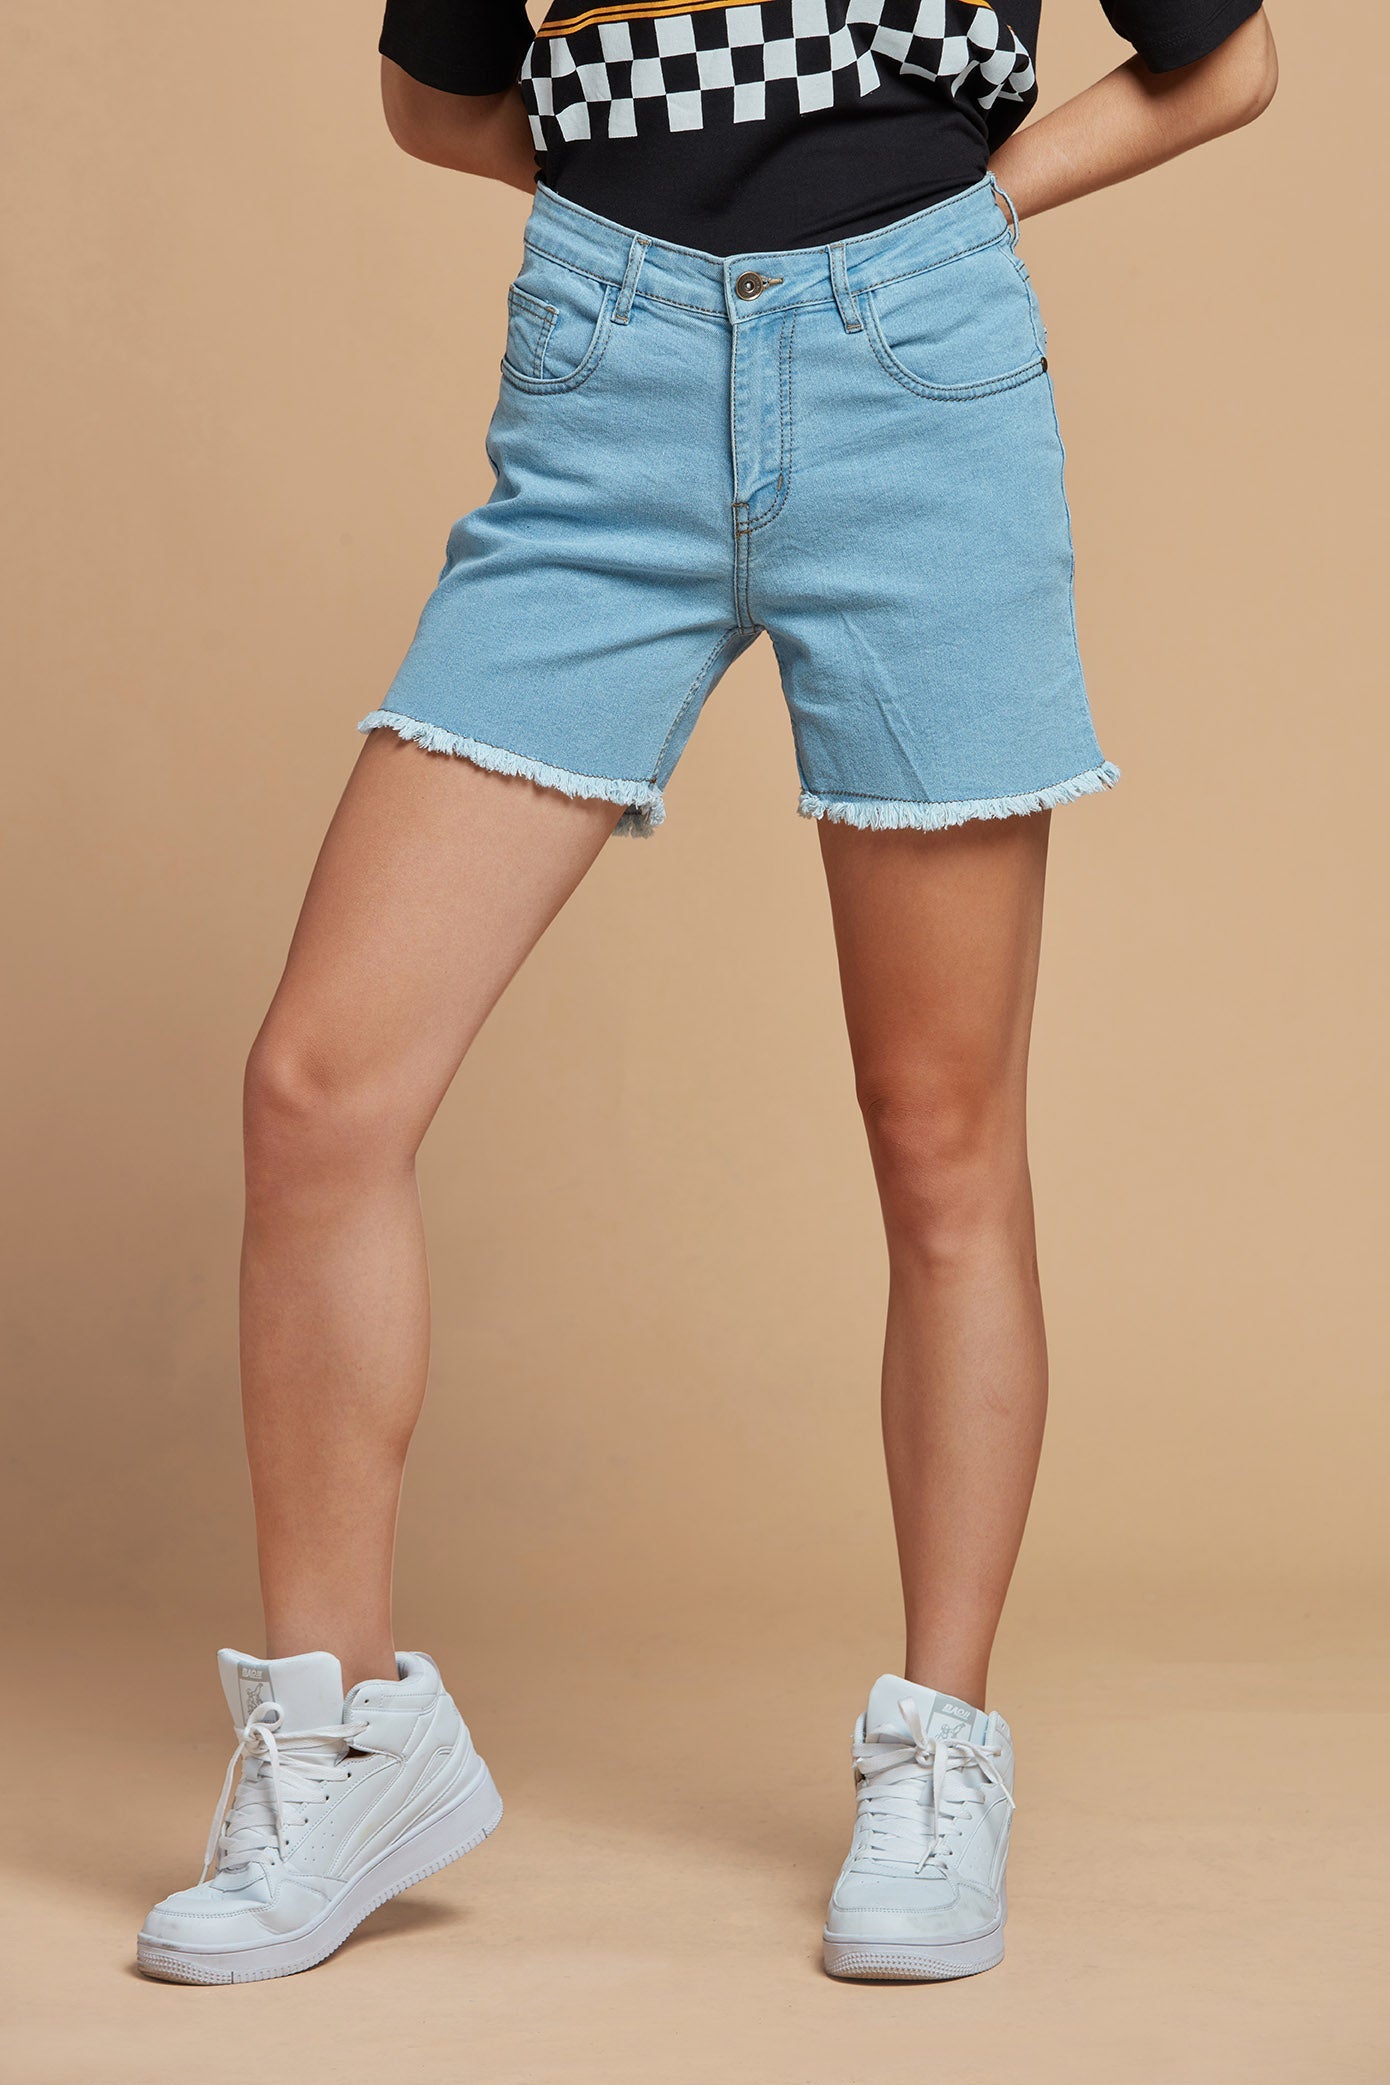 Denim Shorts for Women High Waisted Ripped Hot Shorts Comfy Stretchy  Fringed Denim Shorts at Amazon Women's Clothing store